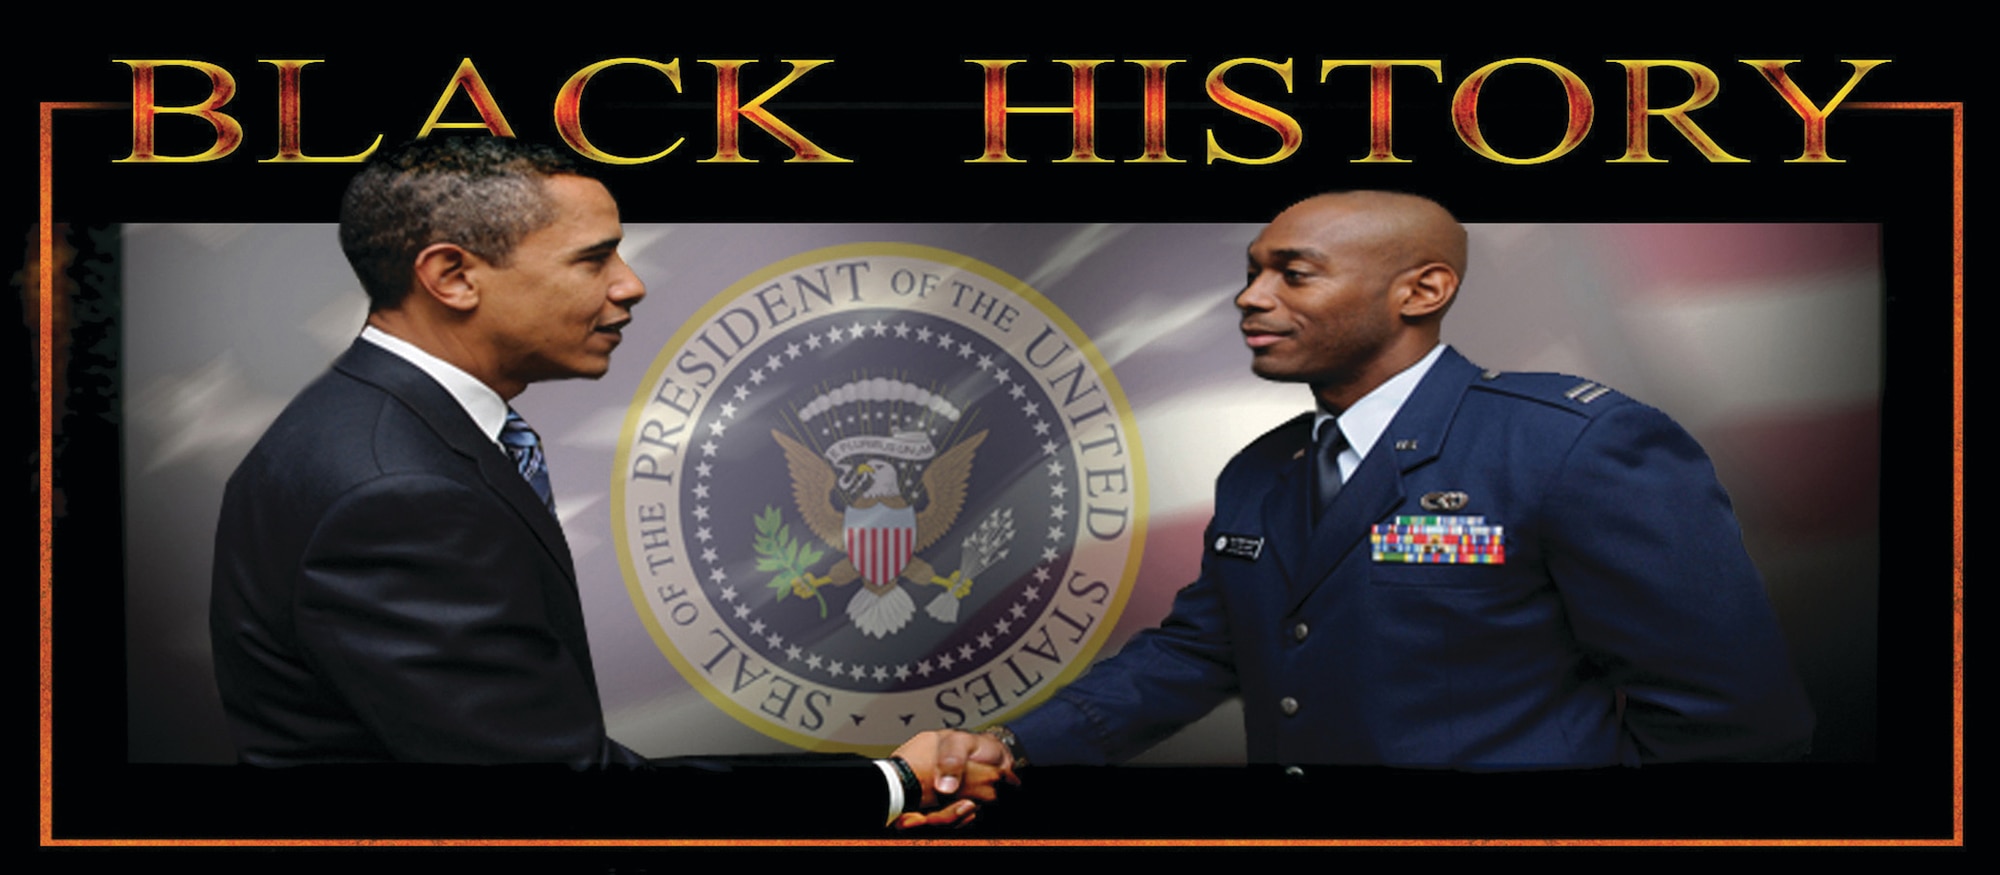 Capt. Toney Collins, 94th Logistics Readiness Squadron, greets then President-Elect Barack Obama early January in Washington D.C. Captain Collins was part of the Armed Forces Inaugural Committee, which coordinated military ceremonial support for the 56th Presidential Inauguration of President Barack Obama. (U.S. Air Force graphic/Tech. Sgt. Bob Martin).
